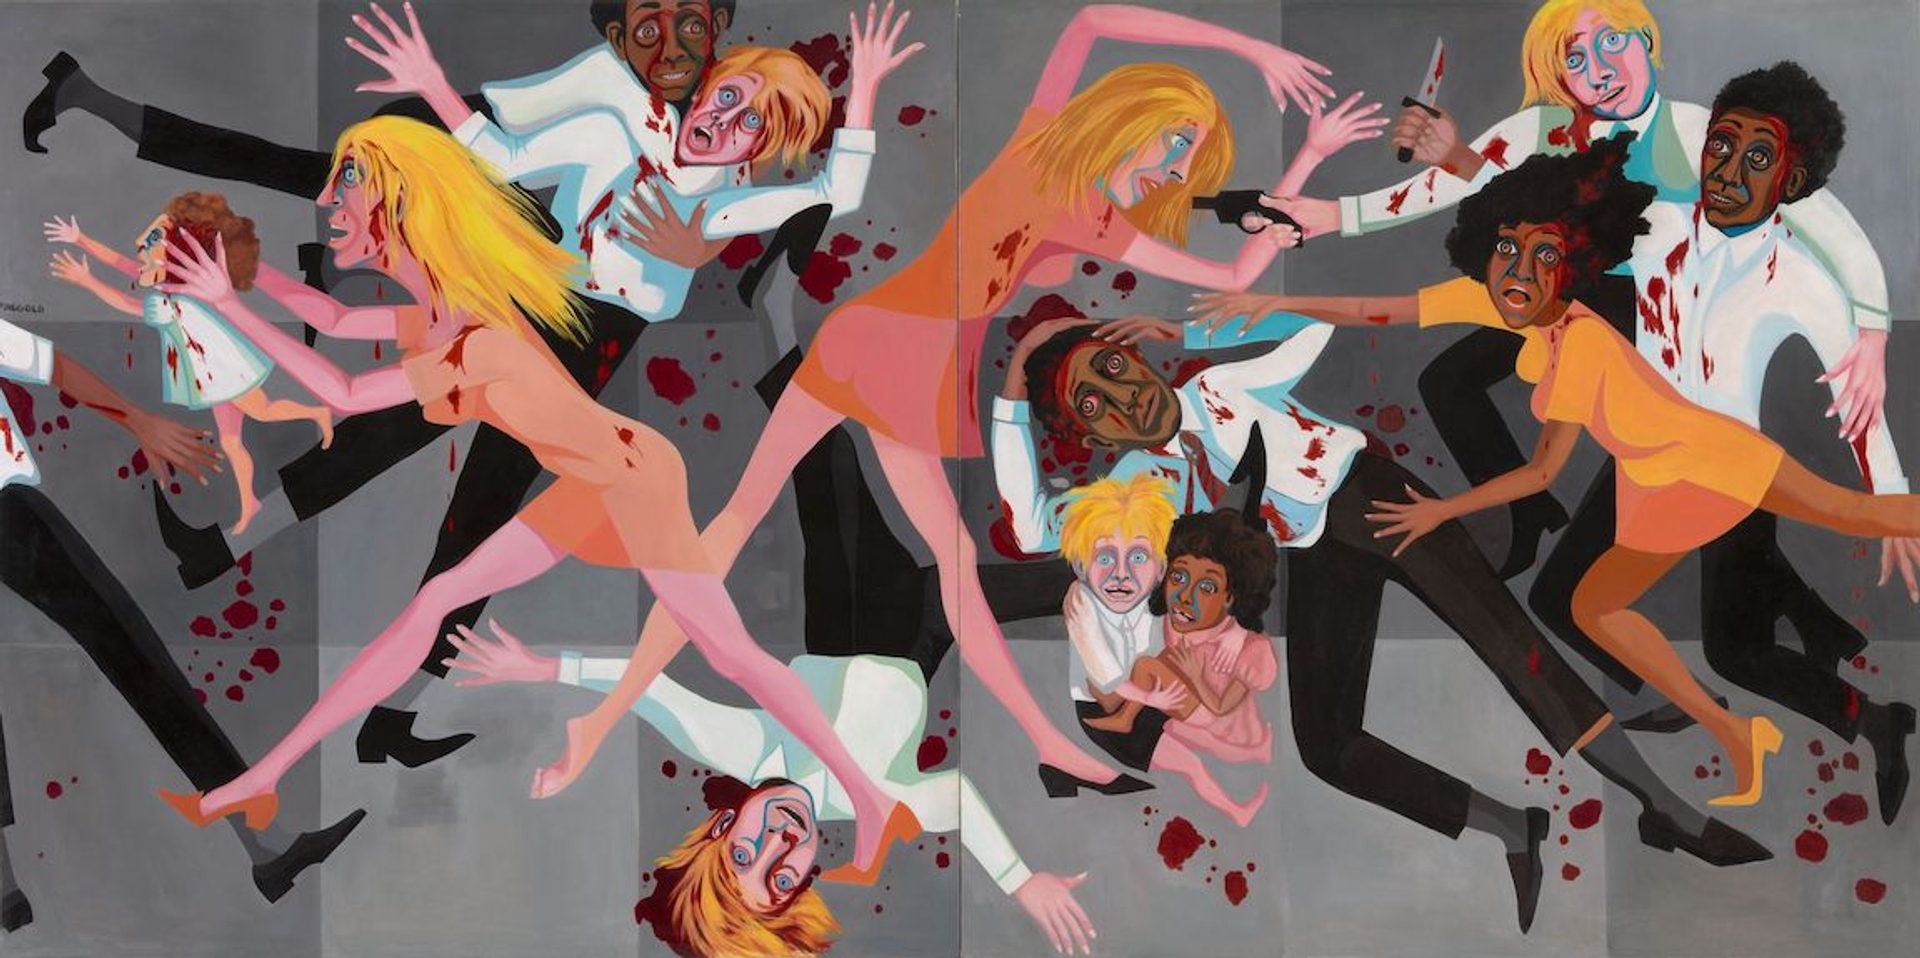 Faith Ringgold, American People Series #20: Die (1967). Courtesy of the Museum of Modern Art, NY.